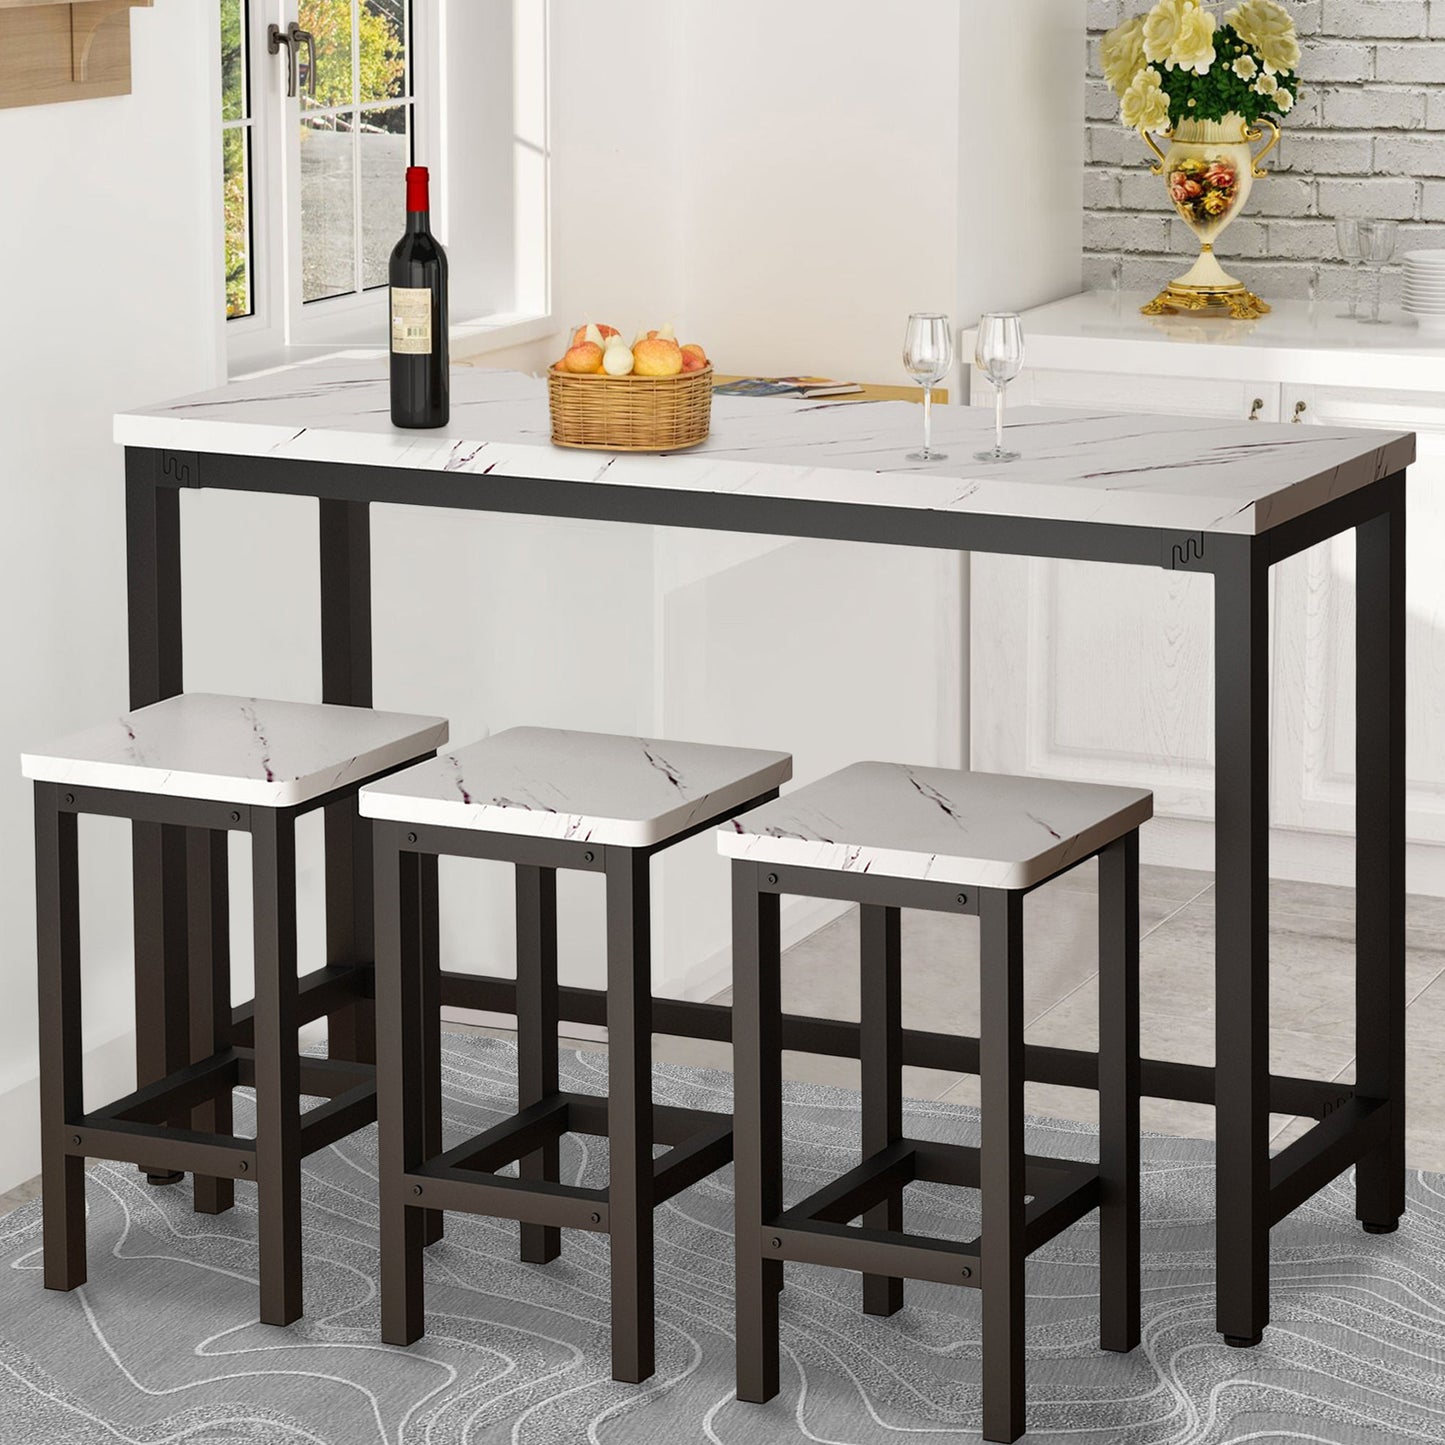 Counter Height Dining Set, 4 Pieces Long Pub Table Set with 3 Stools, Kitchen Table Set for 3, Bar Table Set for Small Spaces, Modern Breakfast Dining Table Set for Home/Restaurant, Brown, D6410